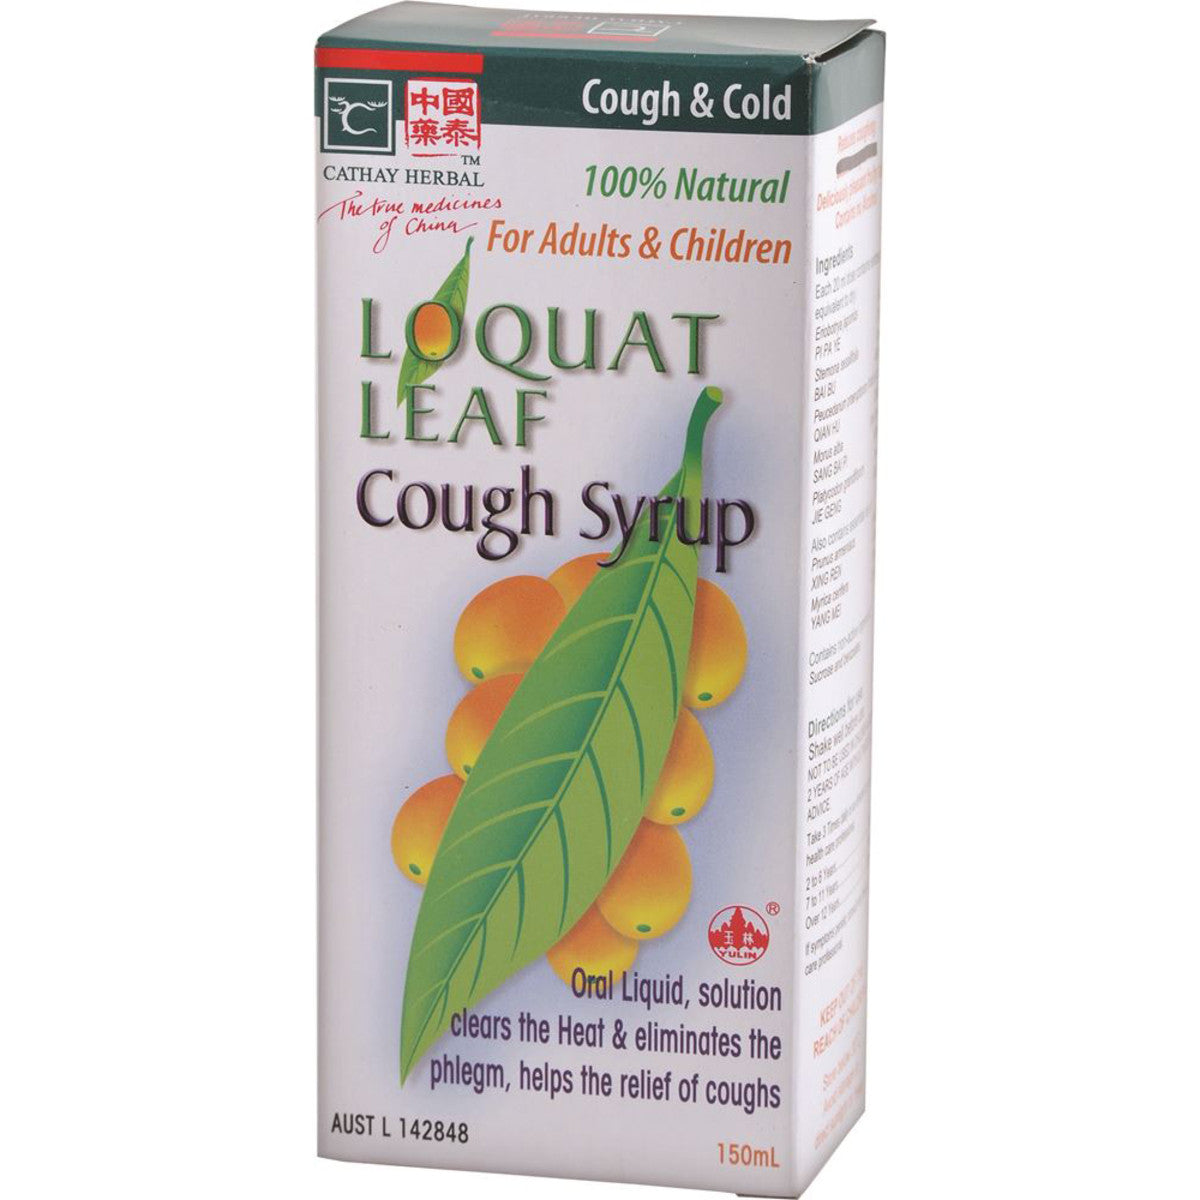 Cathay Herbal - Loquat Leaf Cough Syrup